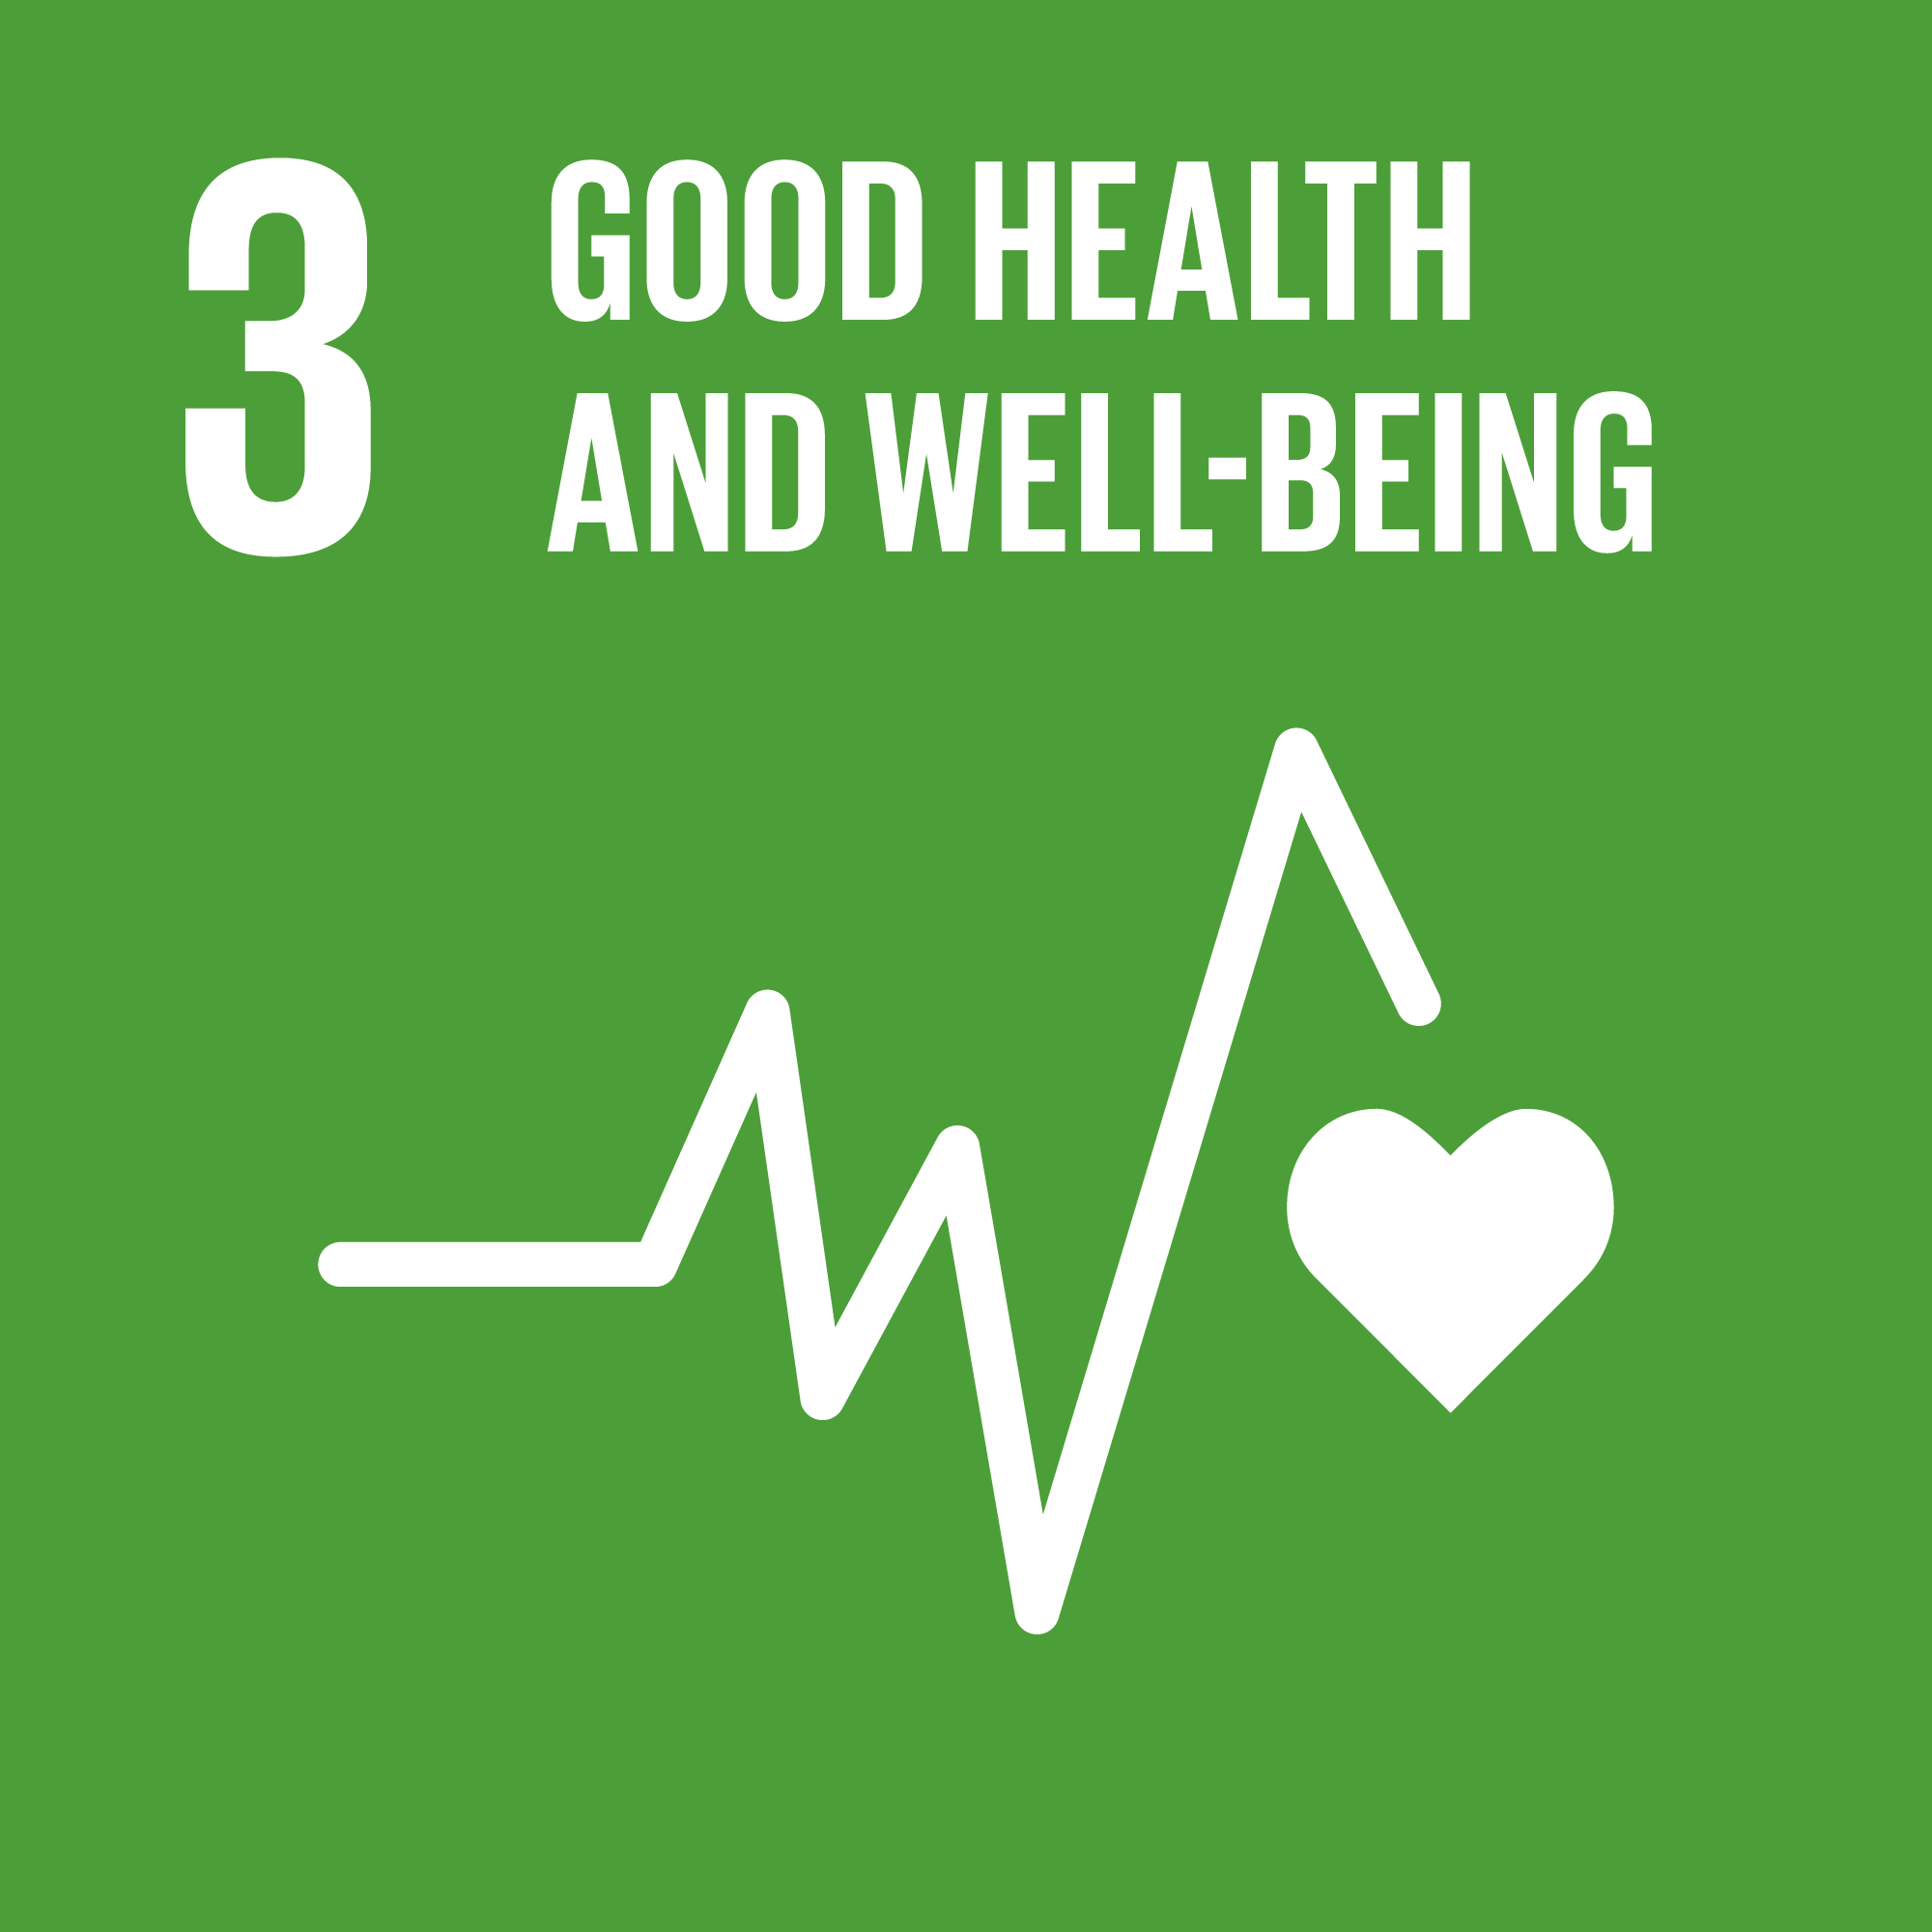 Agenda 2030 goal number 3 Good health and well-being